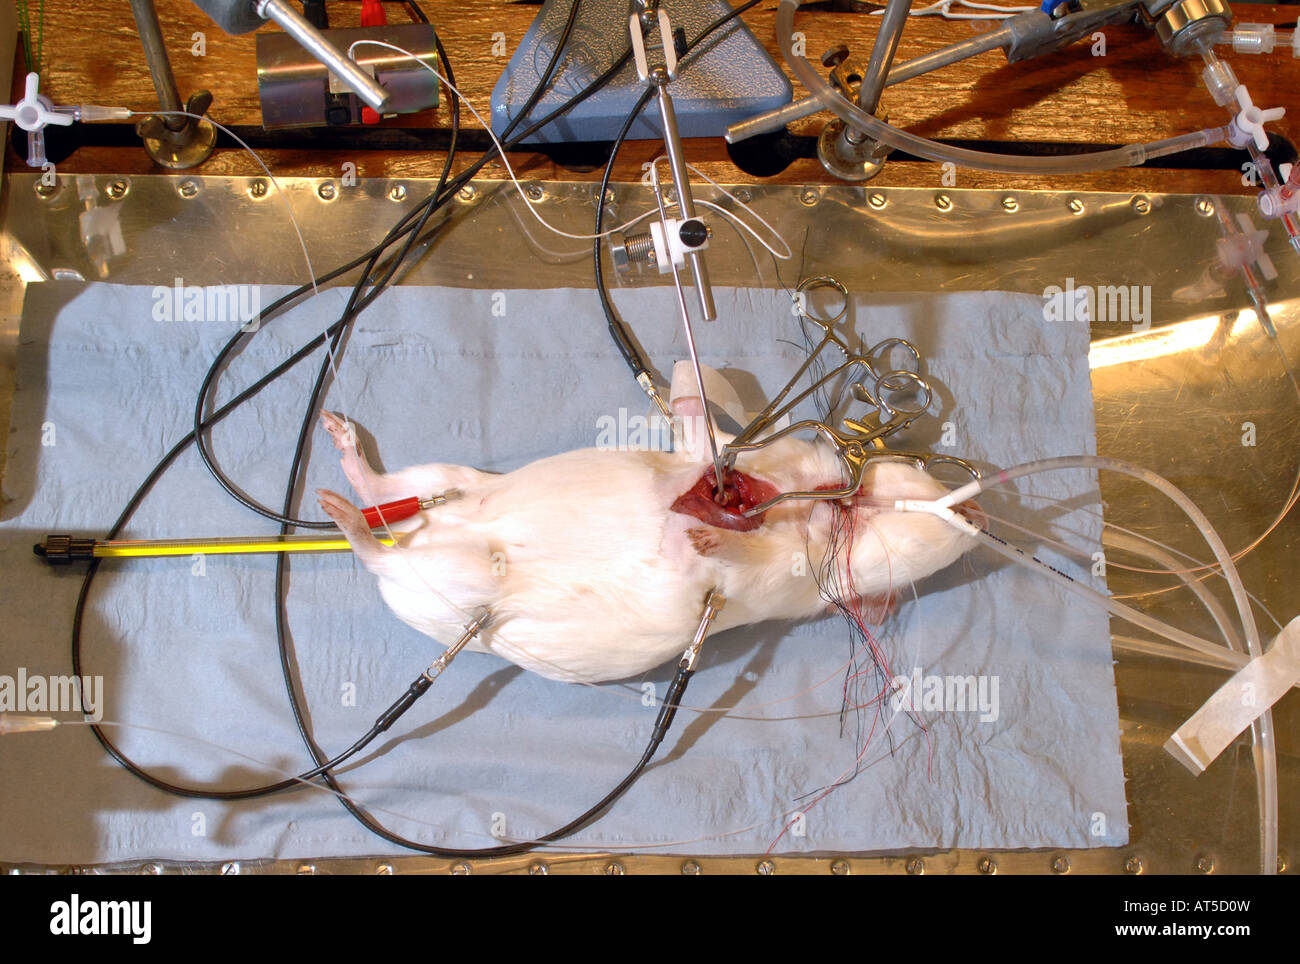 MEDICAL EXPERIMENT ON A RAT TO HELP TREAT HEART DISEASE Stock Photo